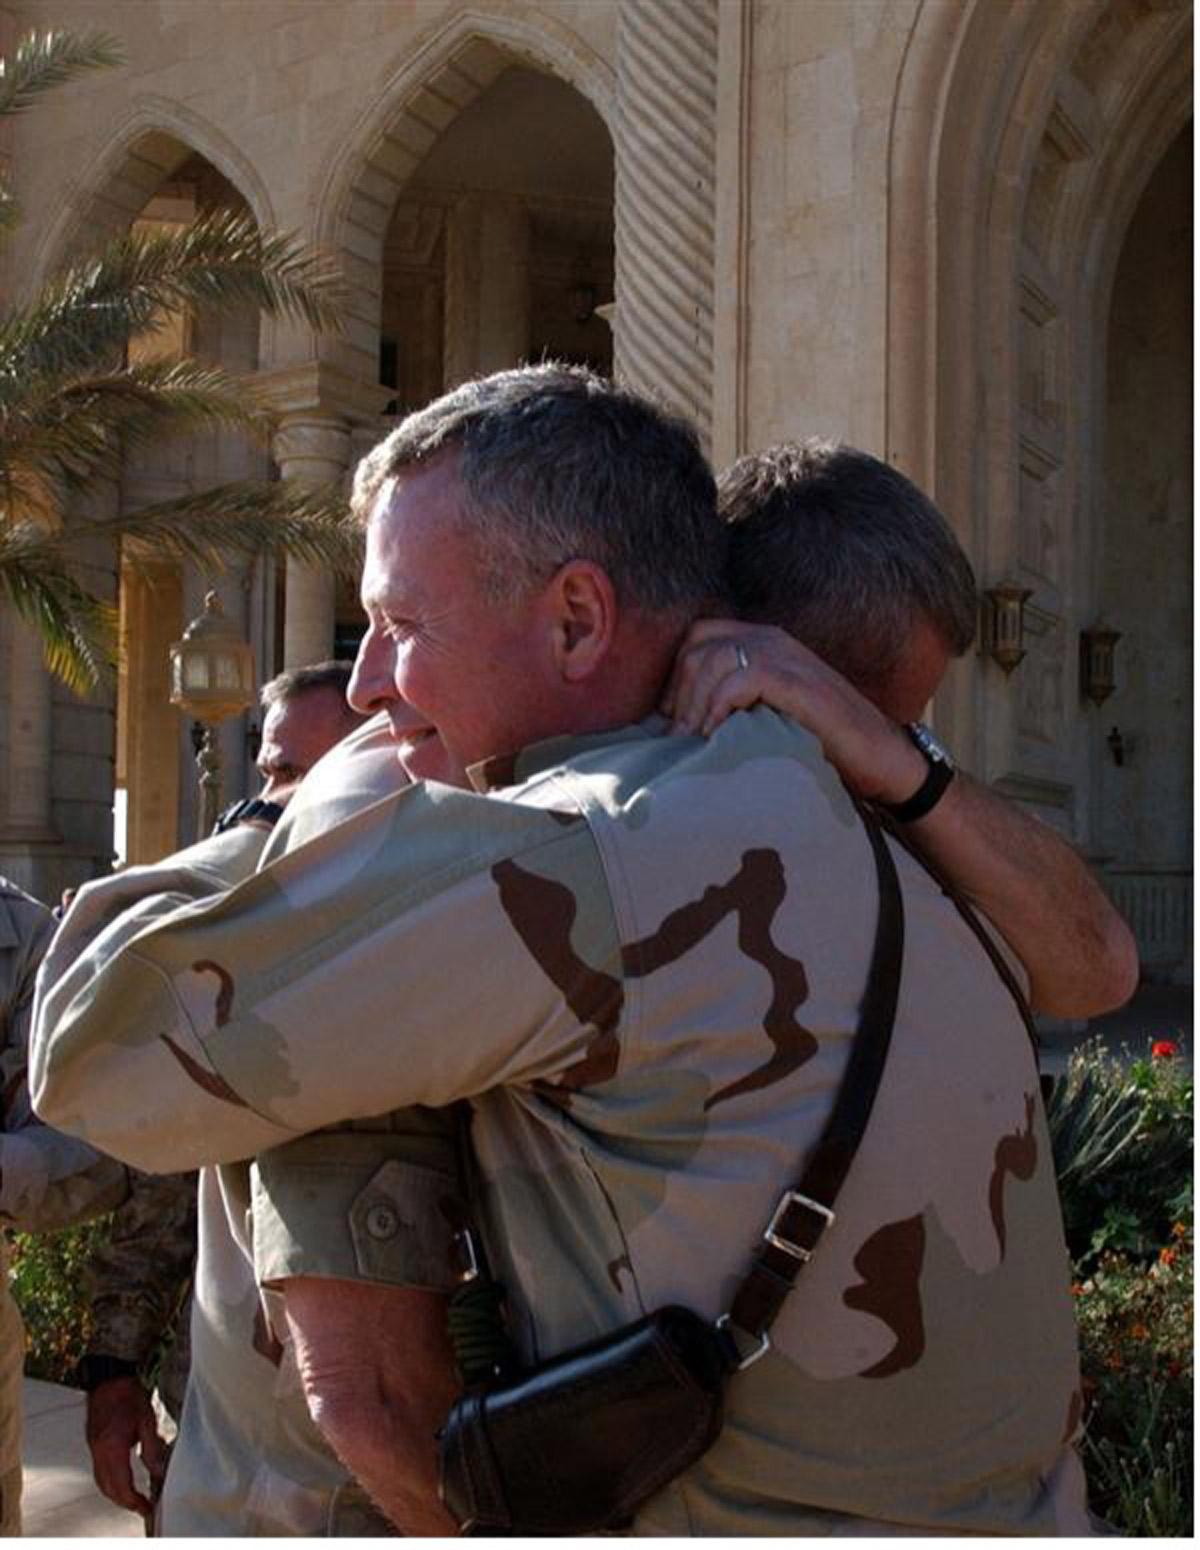 As Baghdad was being secured General David McKiernan and General Tommy Franks congratulate each other at McKiernan’s early entry command post on Camp Victory. McKiernan’s support for SOF ensured this critical resource was used appropriately and to its maximum potential. (Author Collection)